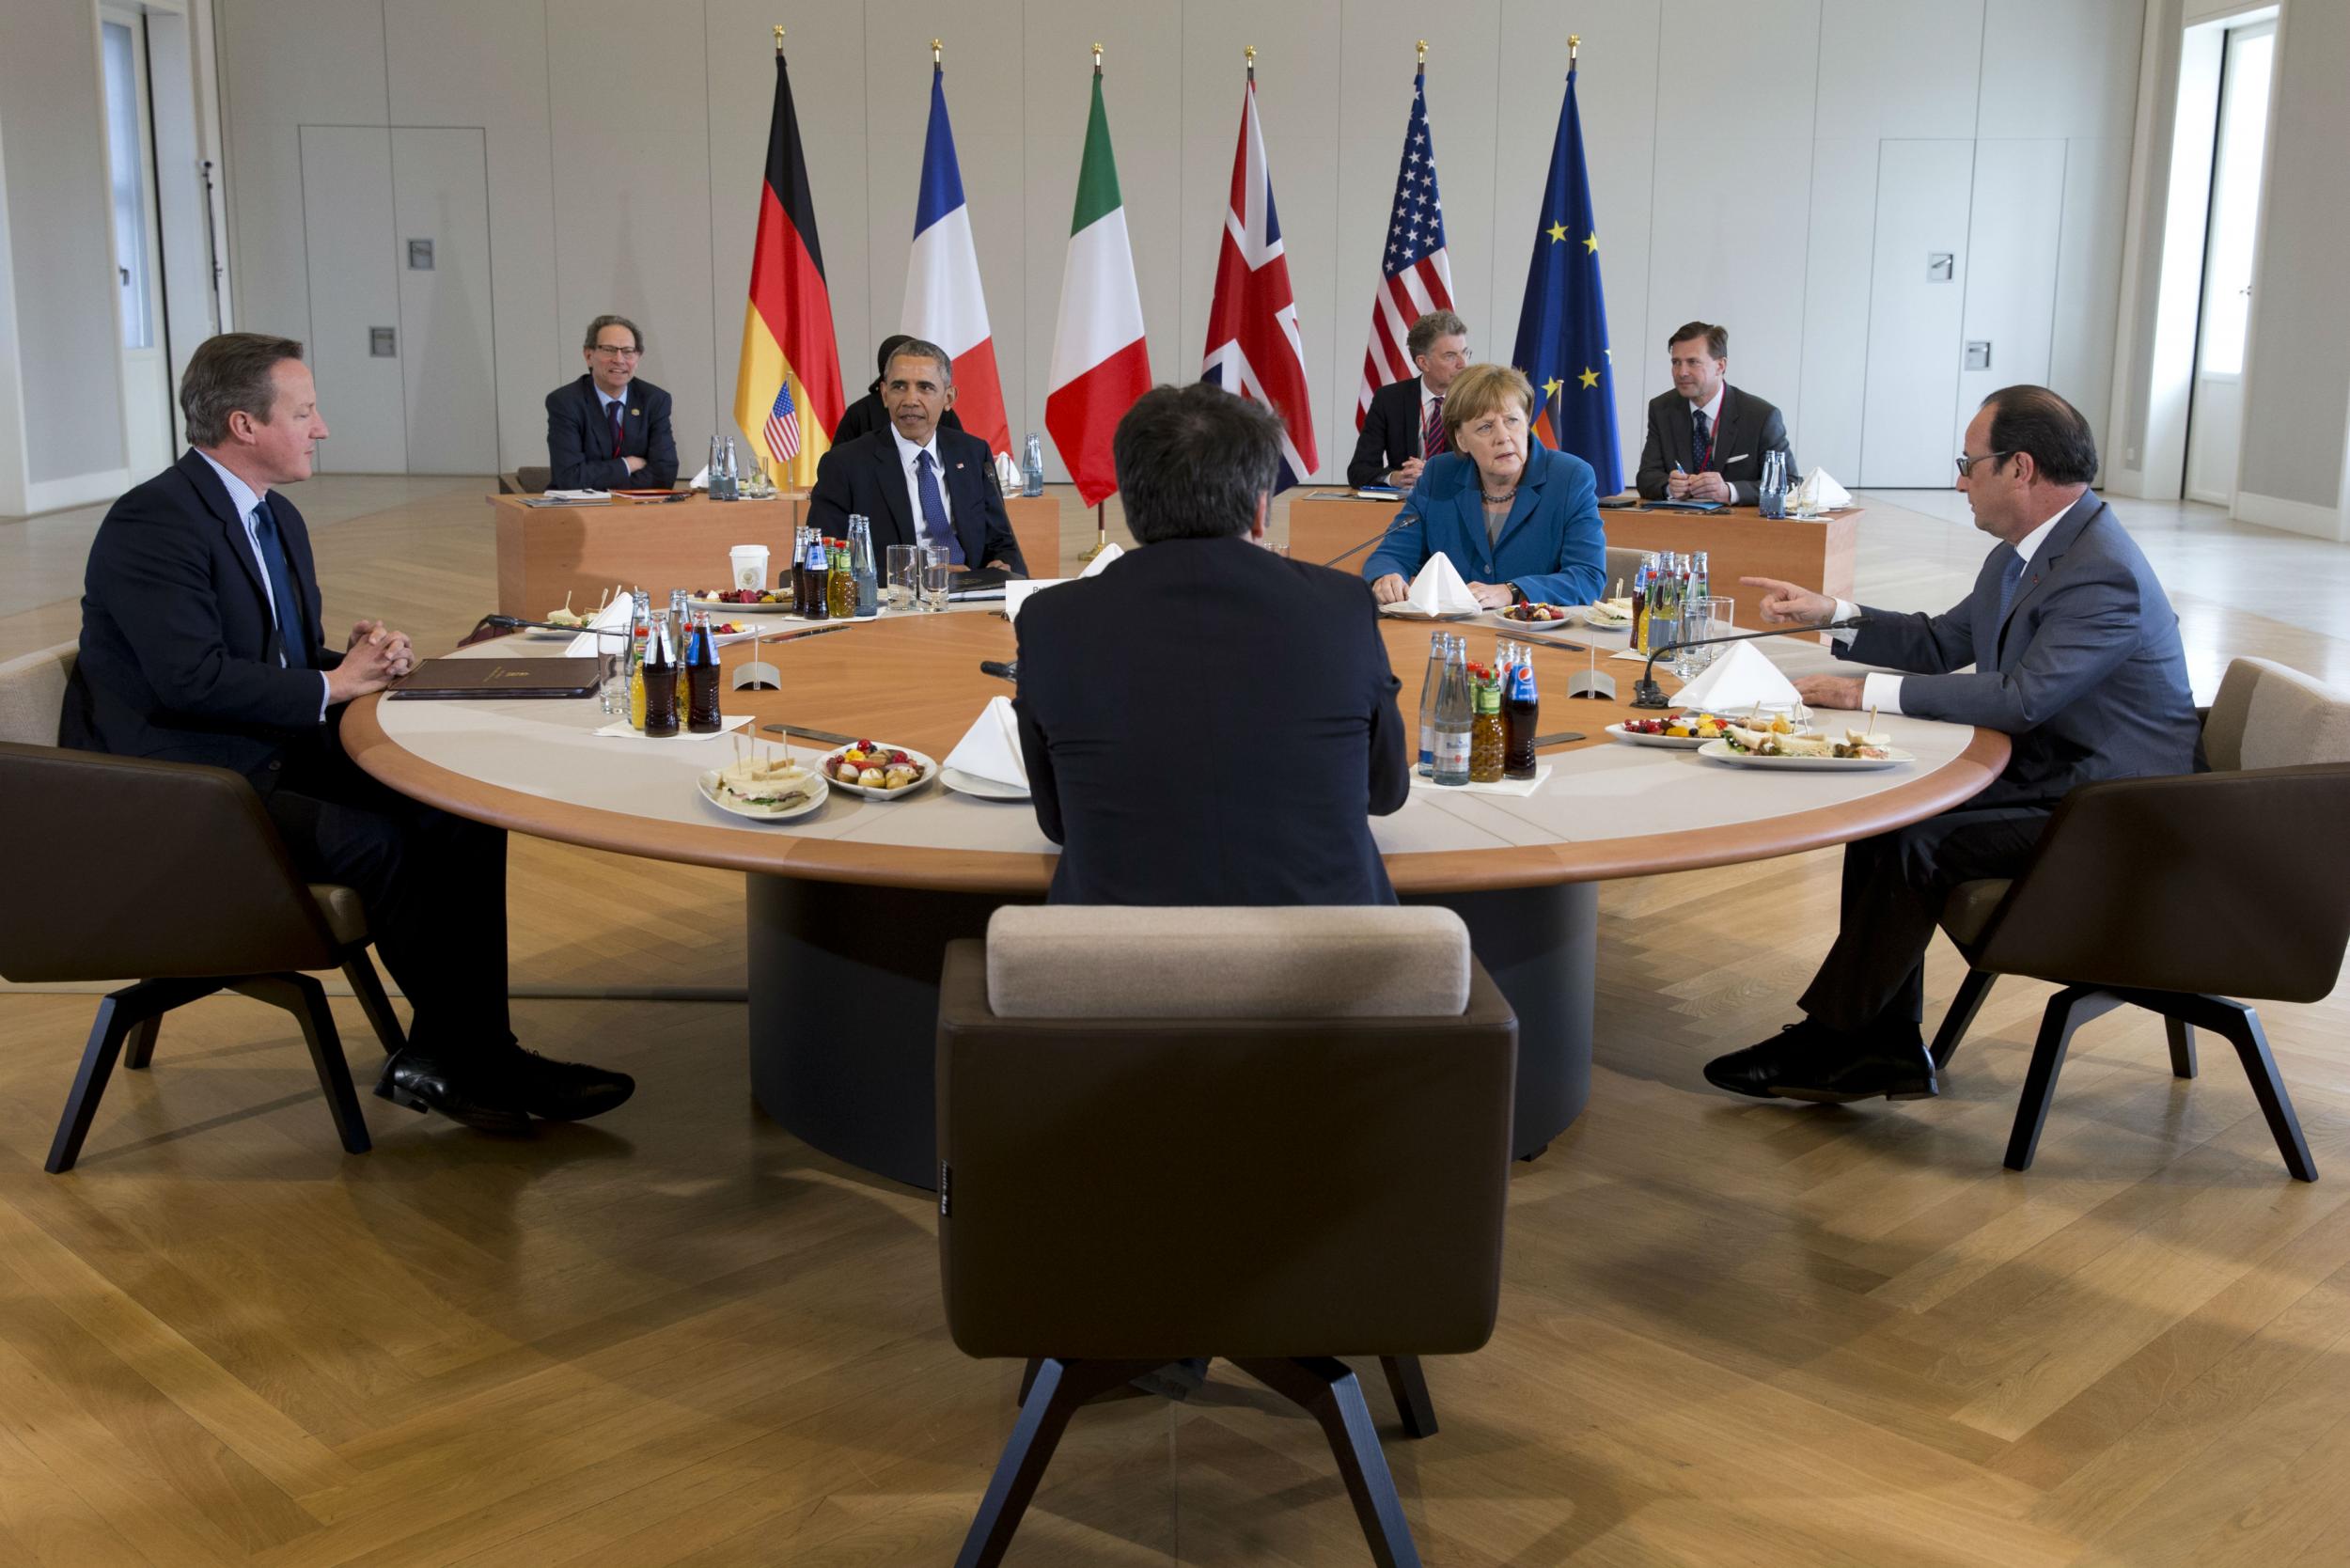 Mr Obama met with the leaders of Germany, France, Italy and Britain